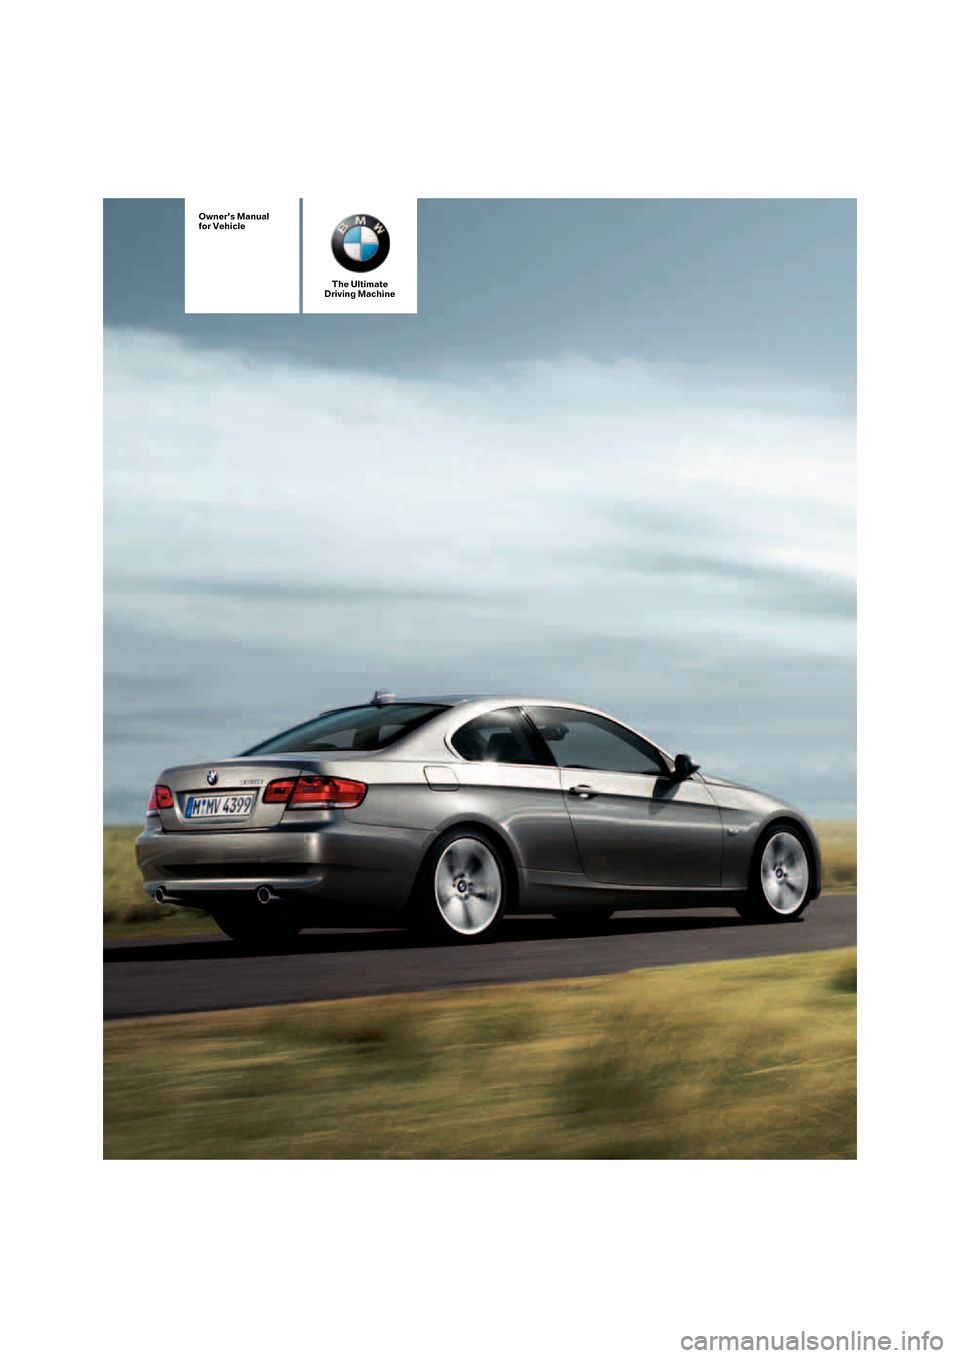 BMW 335I COUPE 2006 E92 Owners Manual The Ultimate
Driving Machine
Owners Manual
for Vehicle
ba8_E9293_US.book  Seite 1  Freitag, 5. Mai 2006  1:02 13 